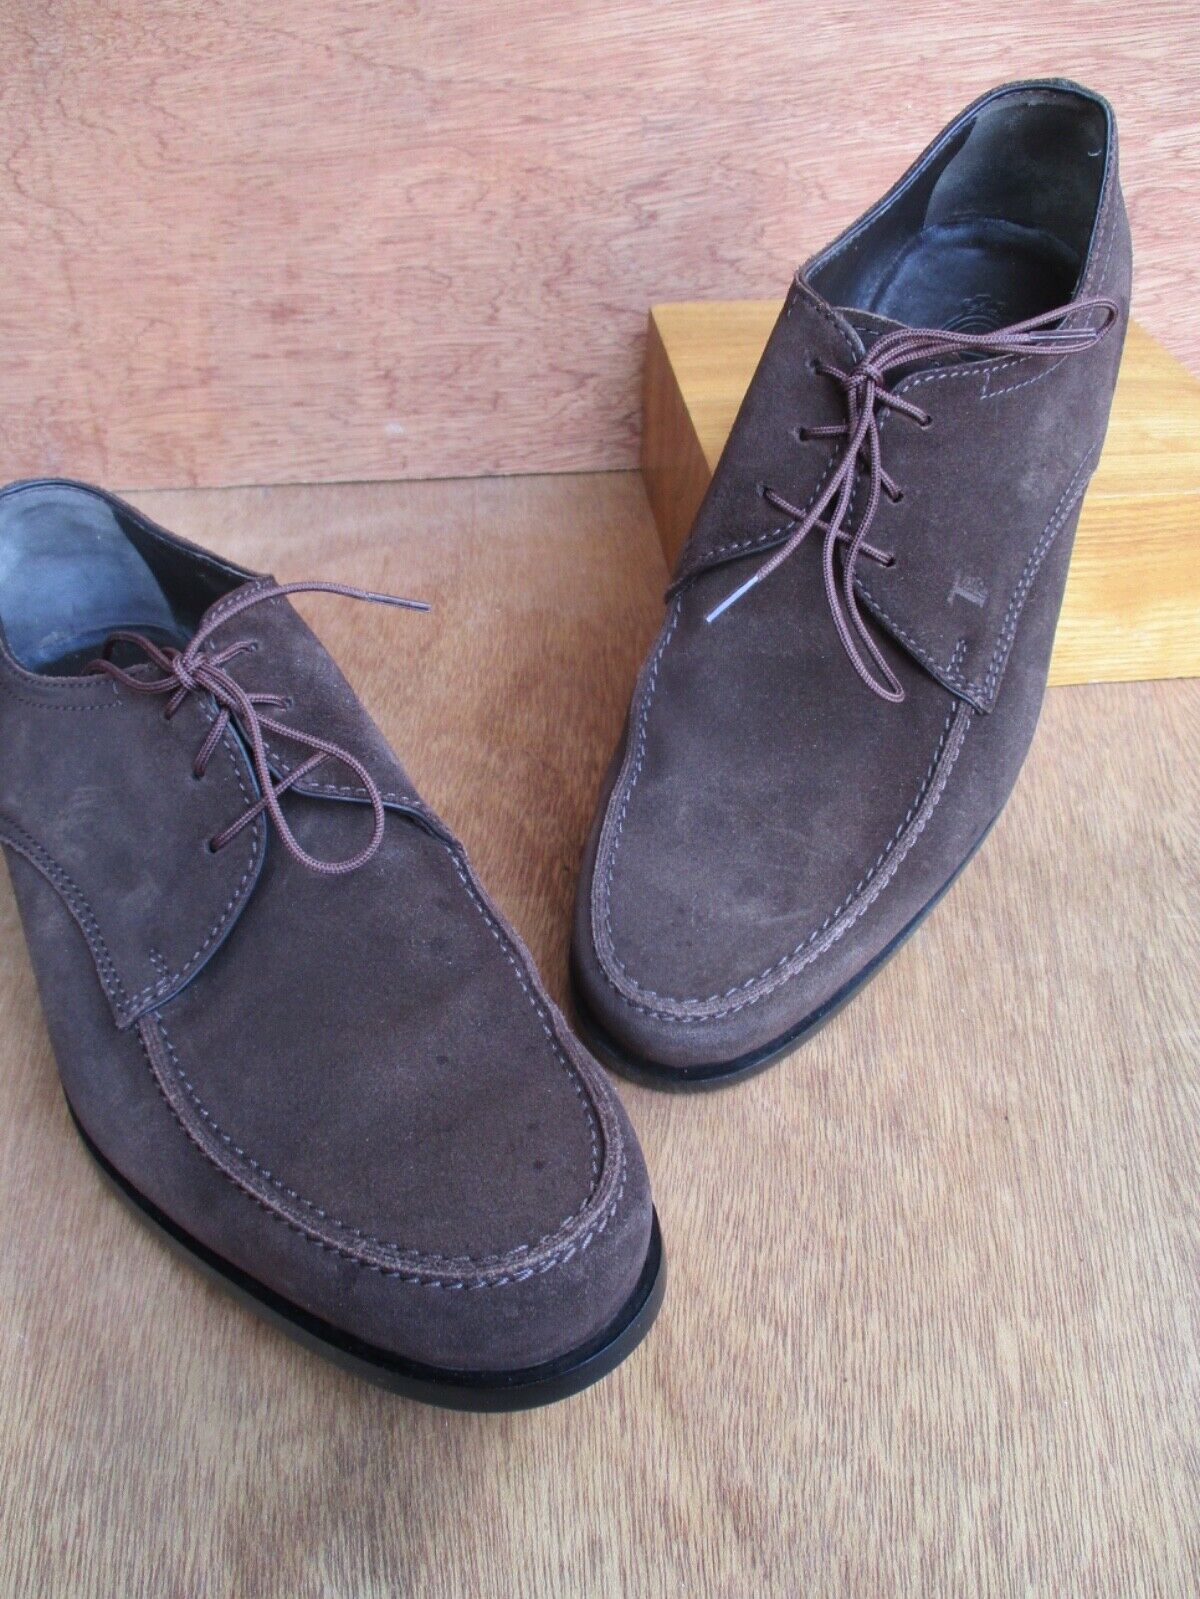 Tods authentic brown suede modern logo blucher dress shoes 7.5 8.5